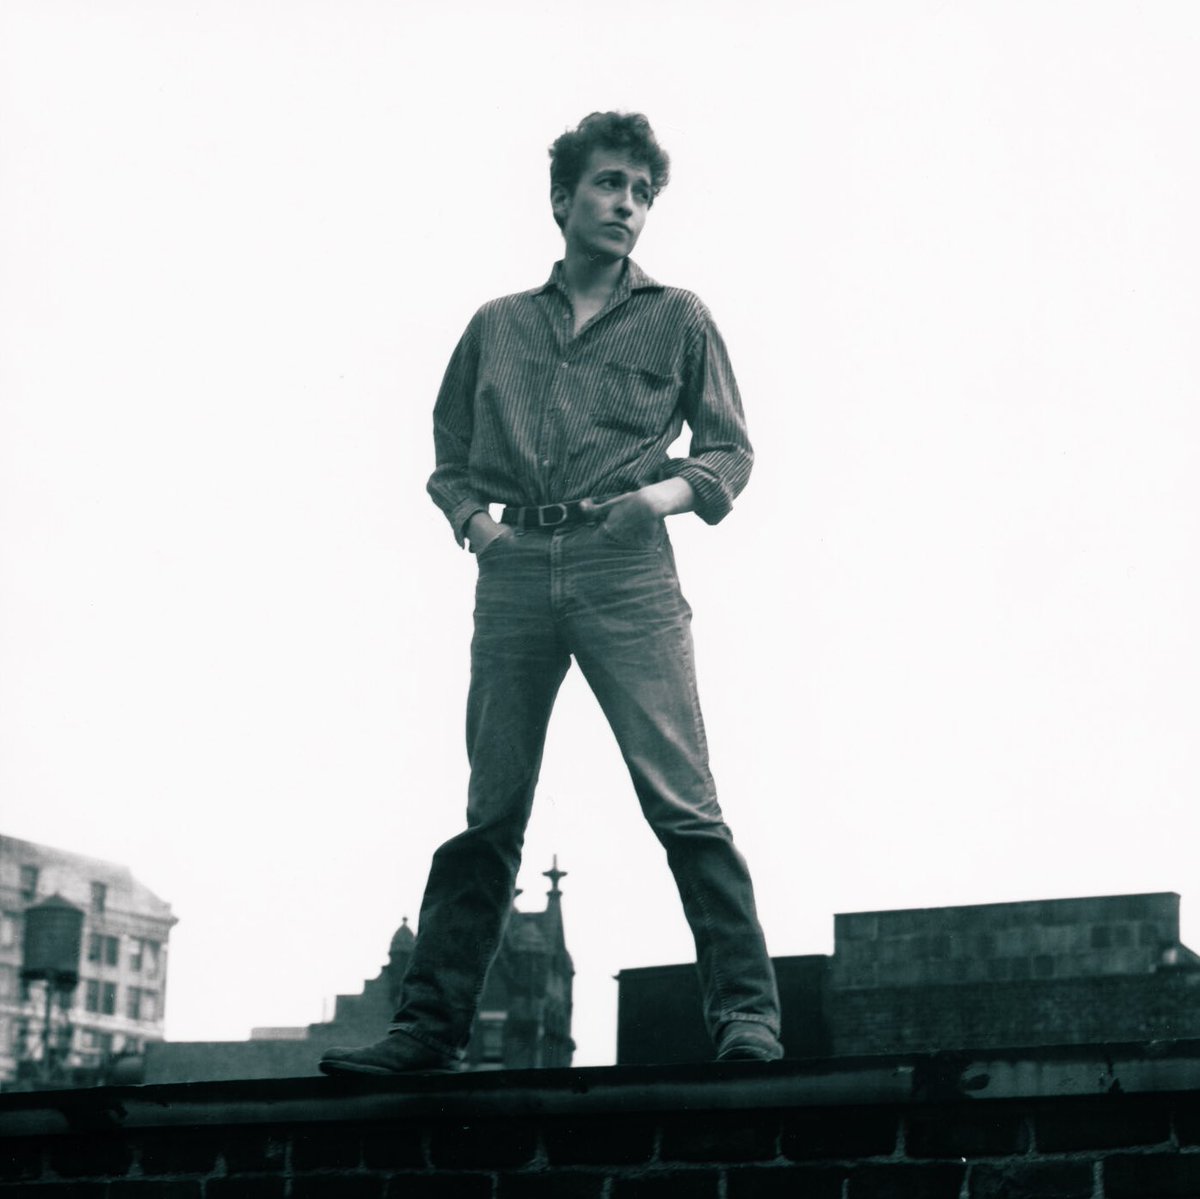 Bob Dylan poses with his hands in his pockets, NYC, 1963. 📸: Ralph Baxter. #BobDylan #Dylan